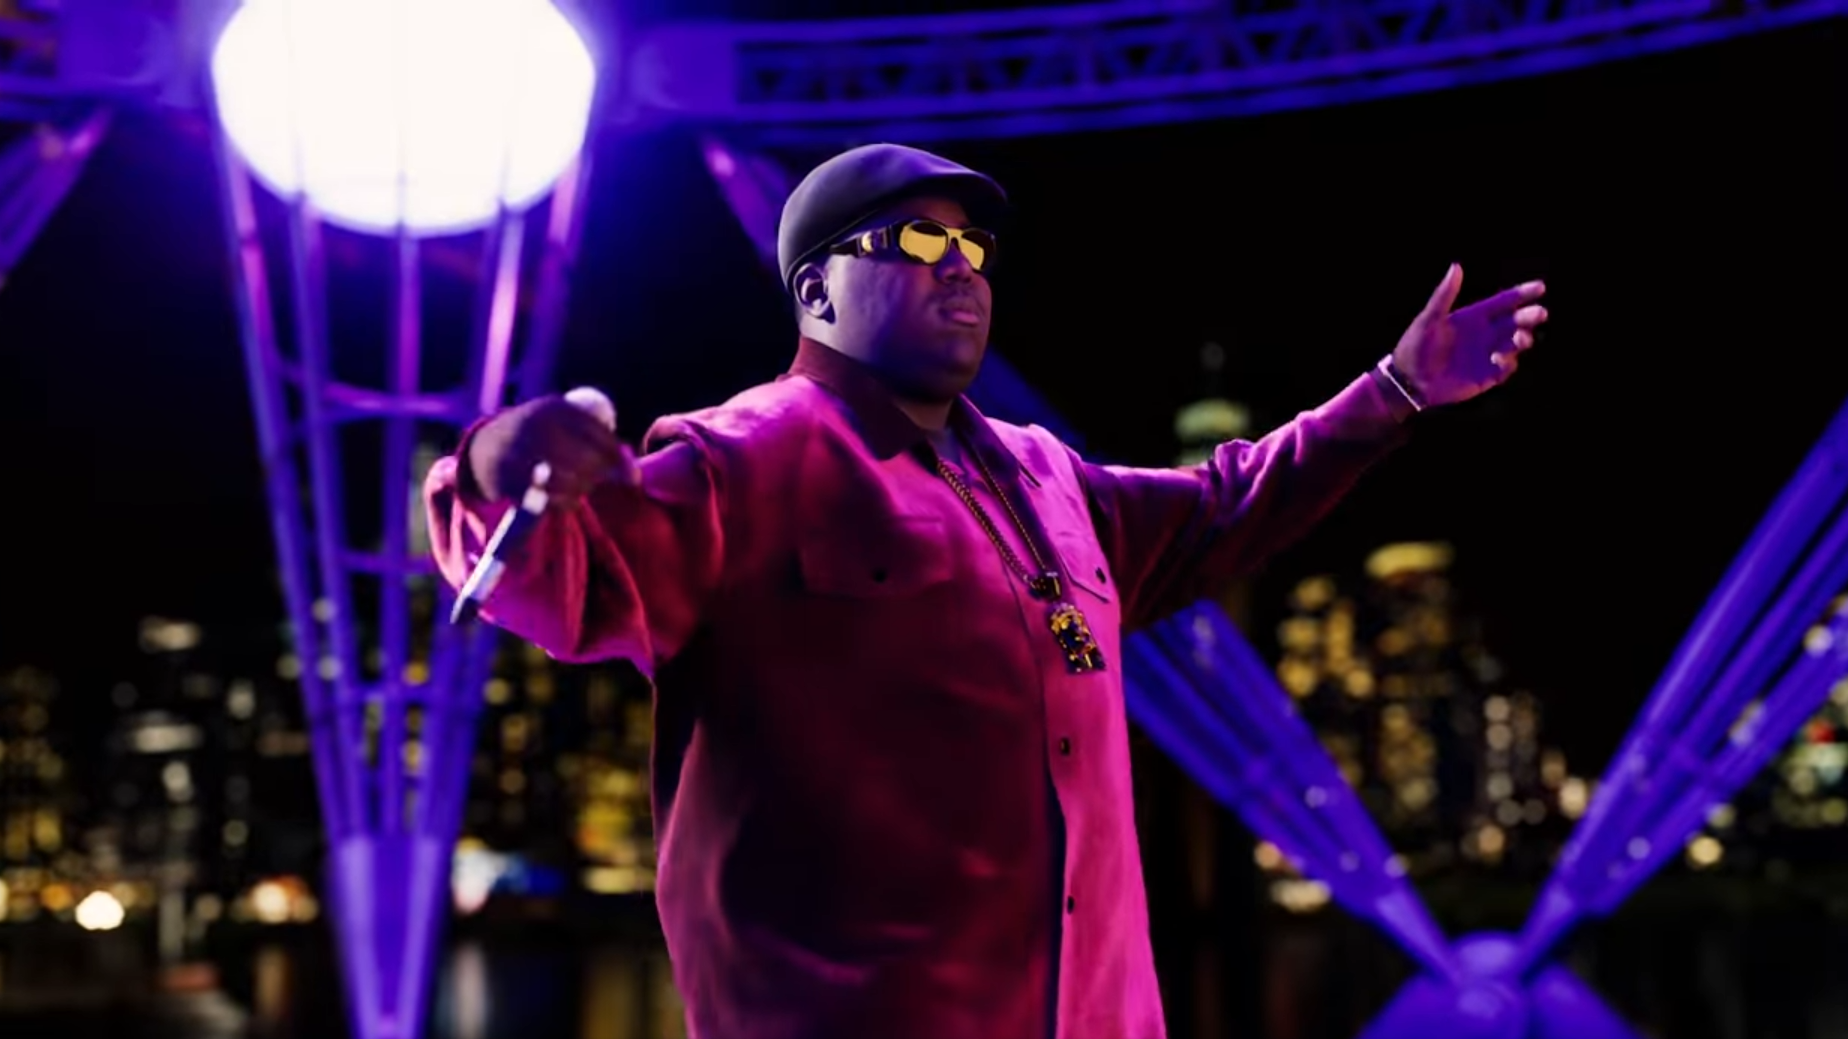 still from &quot;The Notorious B.I.G. Sky’s The Limit: A VR Concert Experience&quot; showing the avatar of Biggie Smalls on the virtual stage